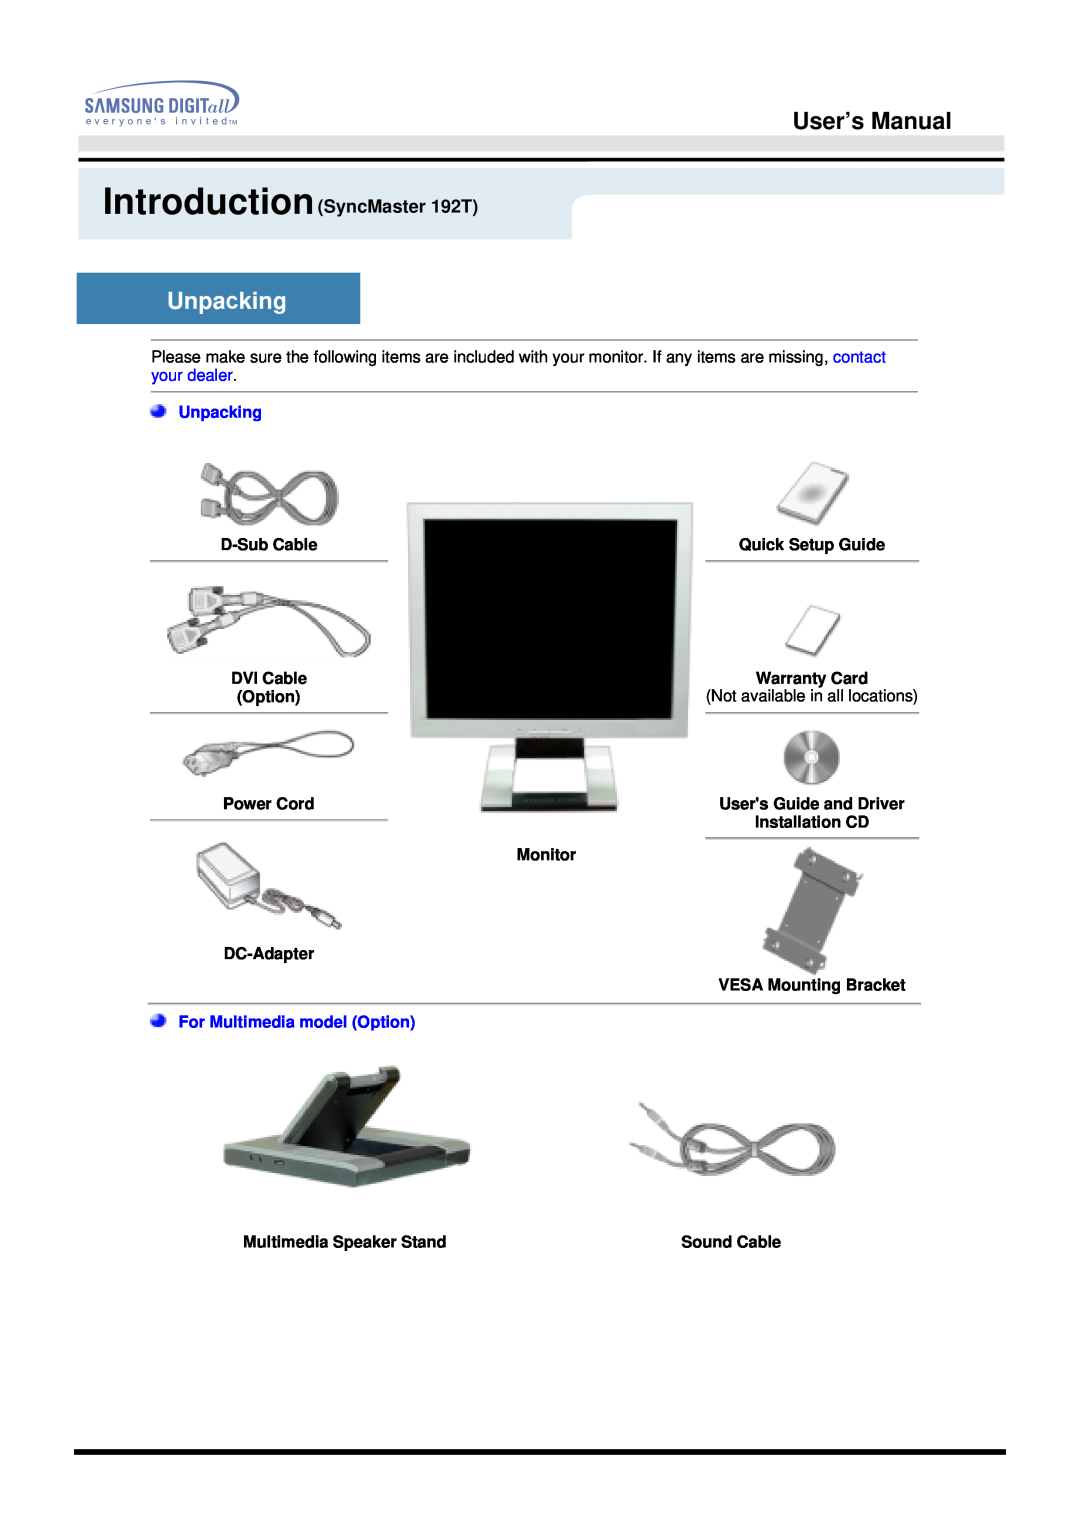 Samsung User’s Manual, Unpacking, IntroductionSyncMaster 192T, D-Sub Cable, Quick Setup Guide, DVI Cable, Warranty Card 